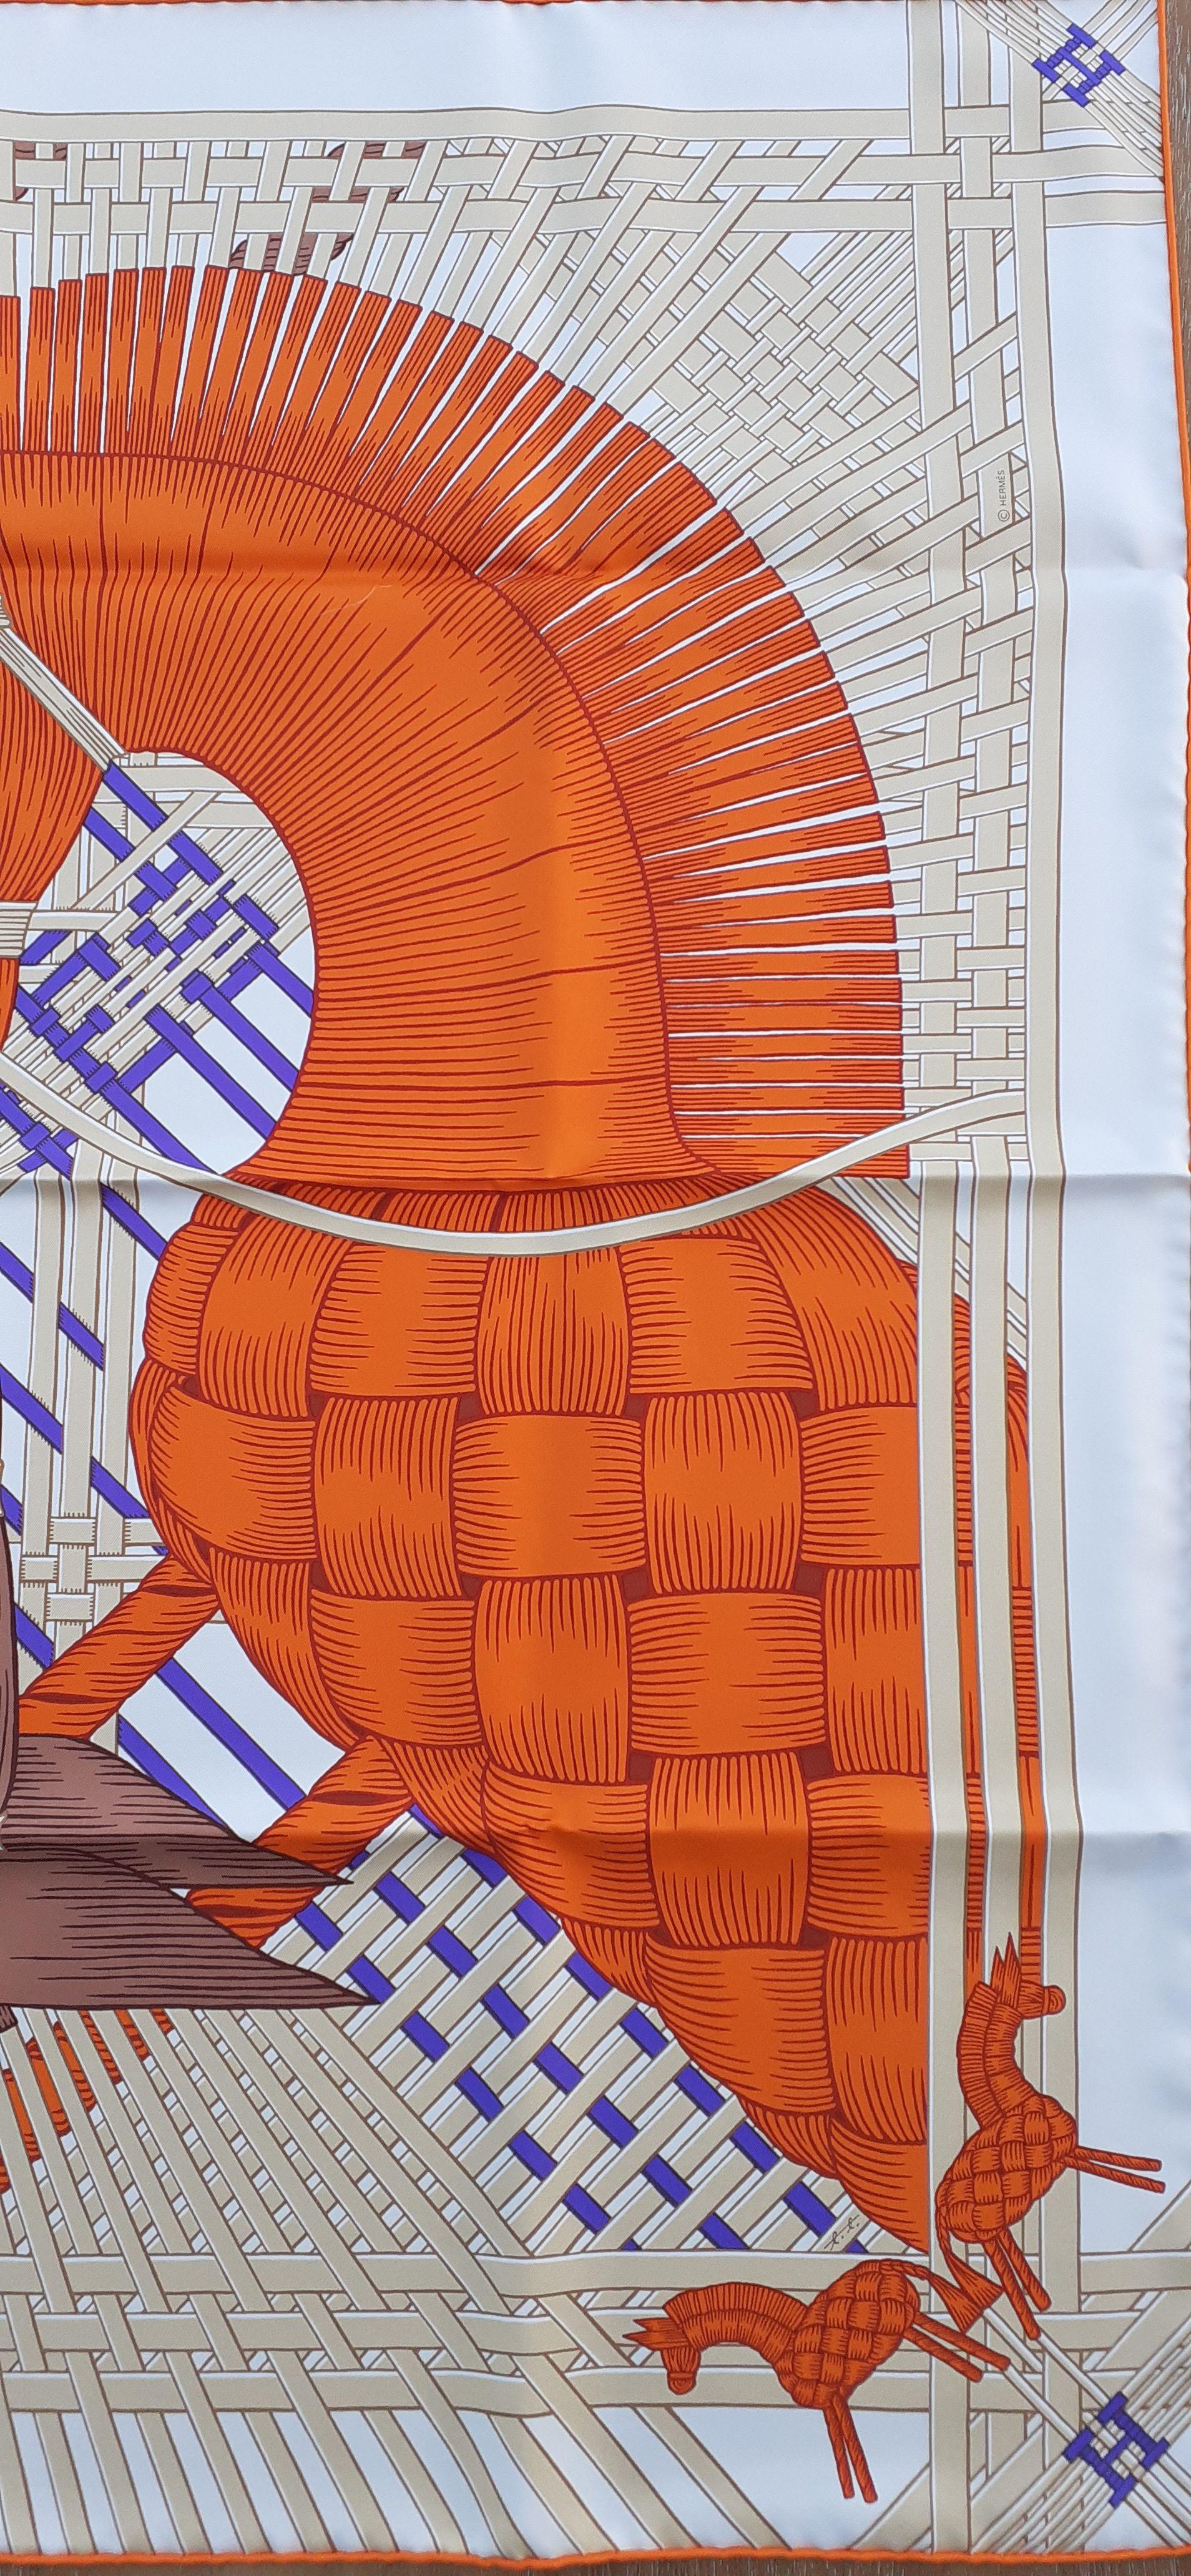 hermes limited edition scarf